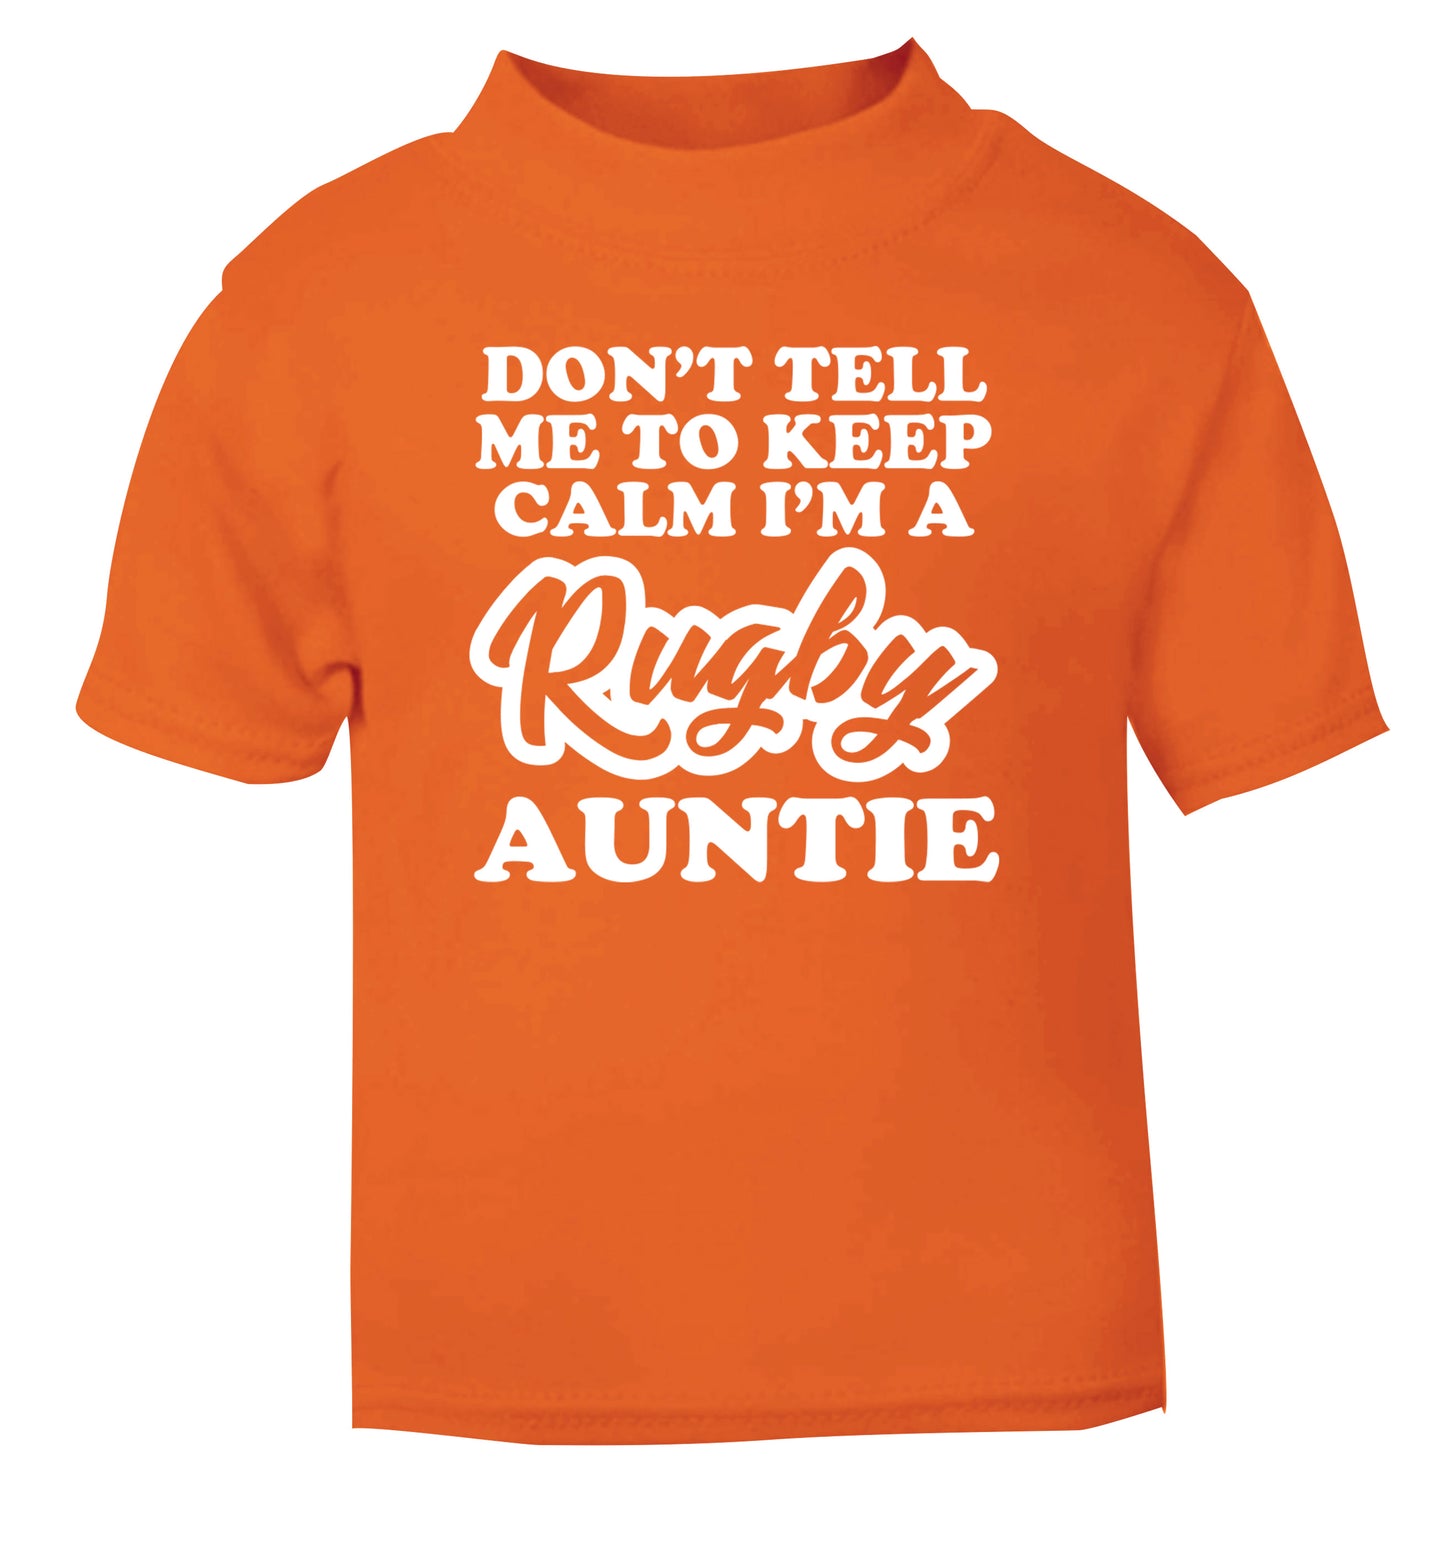 Don't tell me keep calm I'm a rugby auntie orange Baby Toddler Tshirt 2 Years